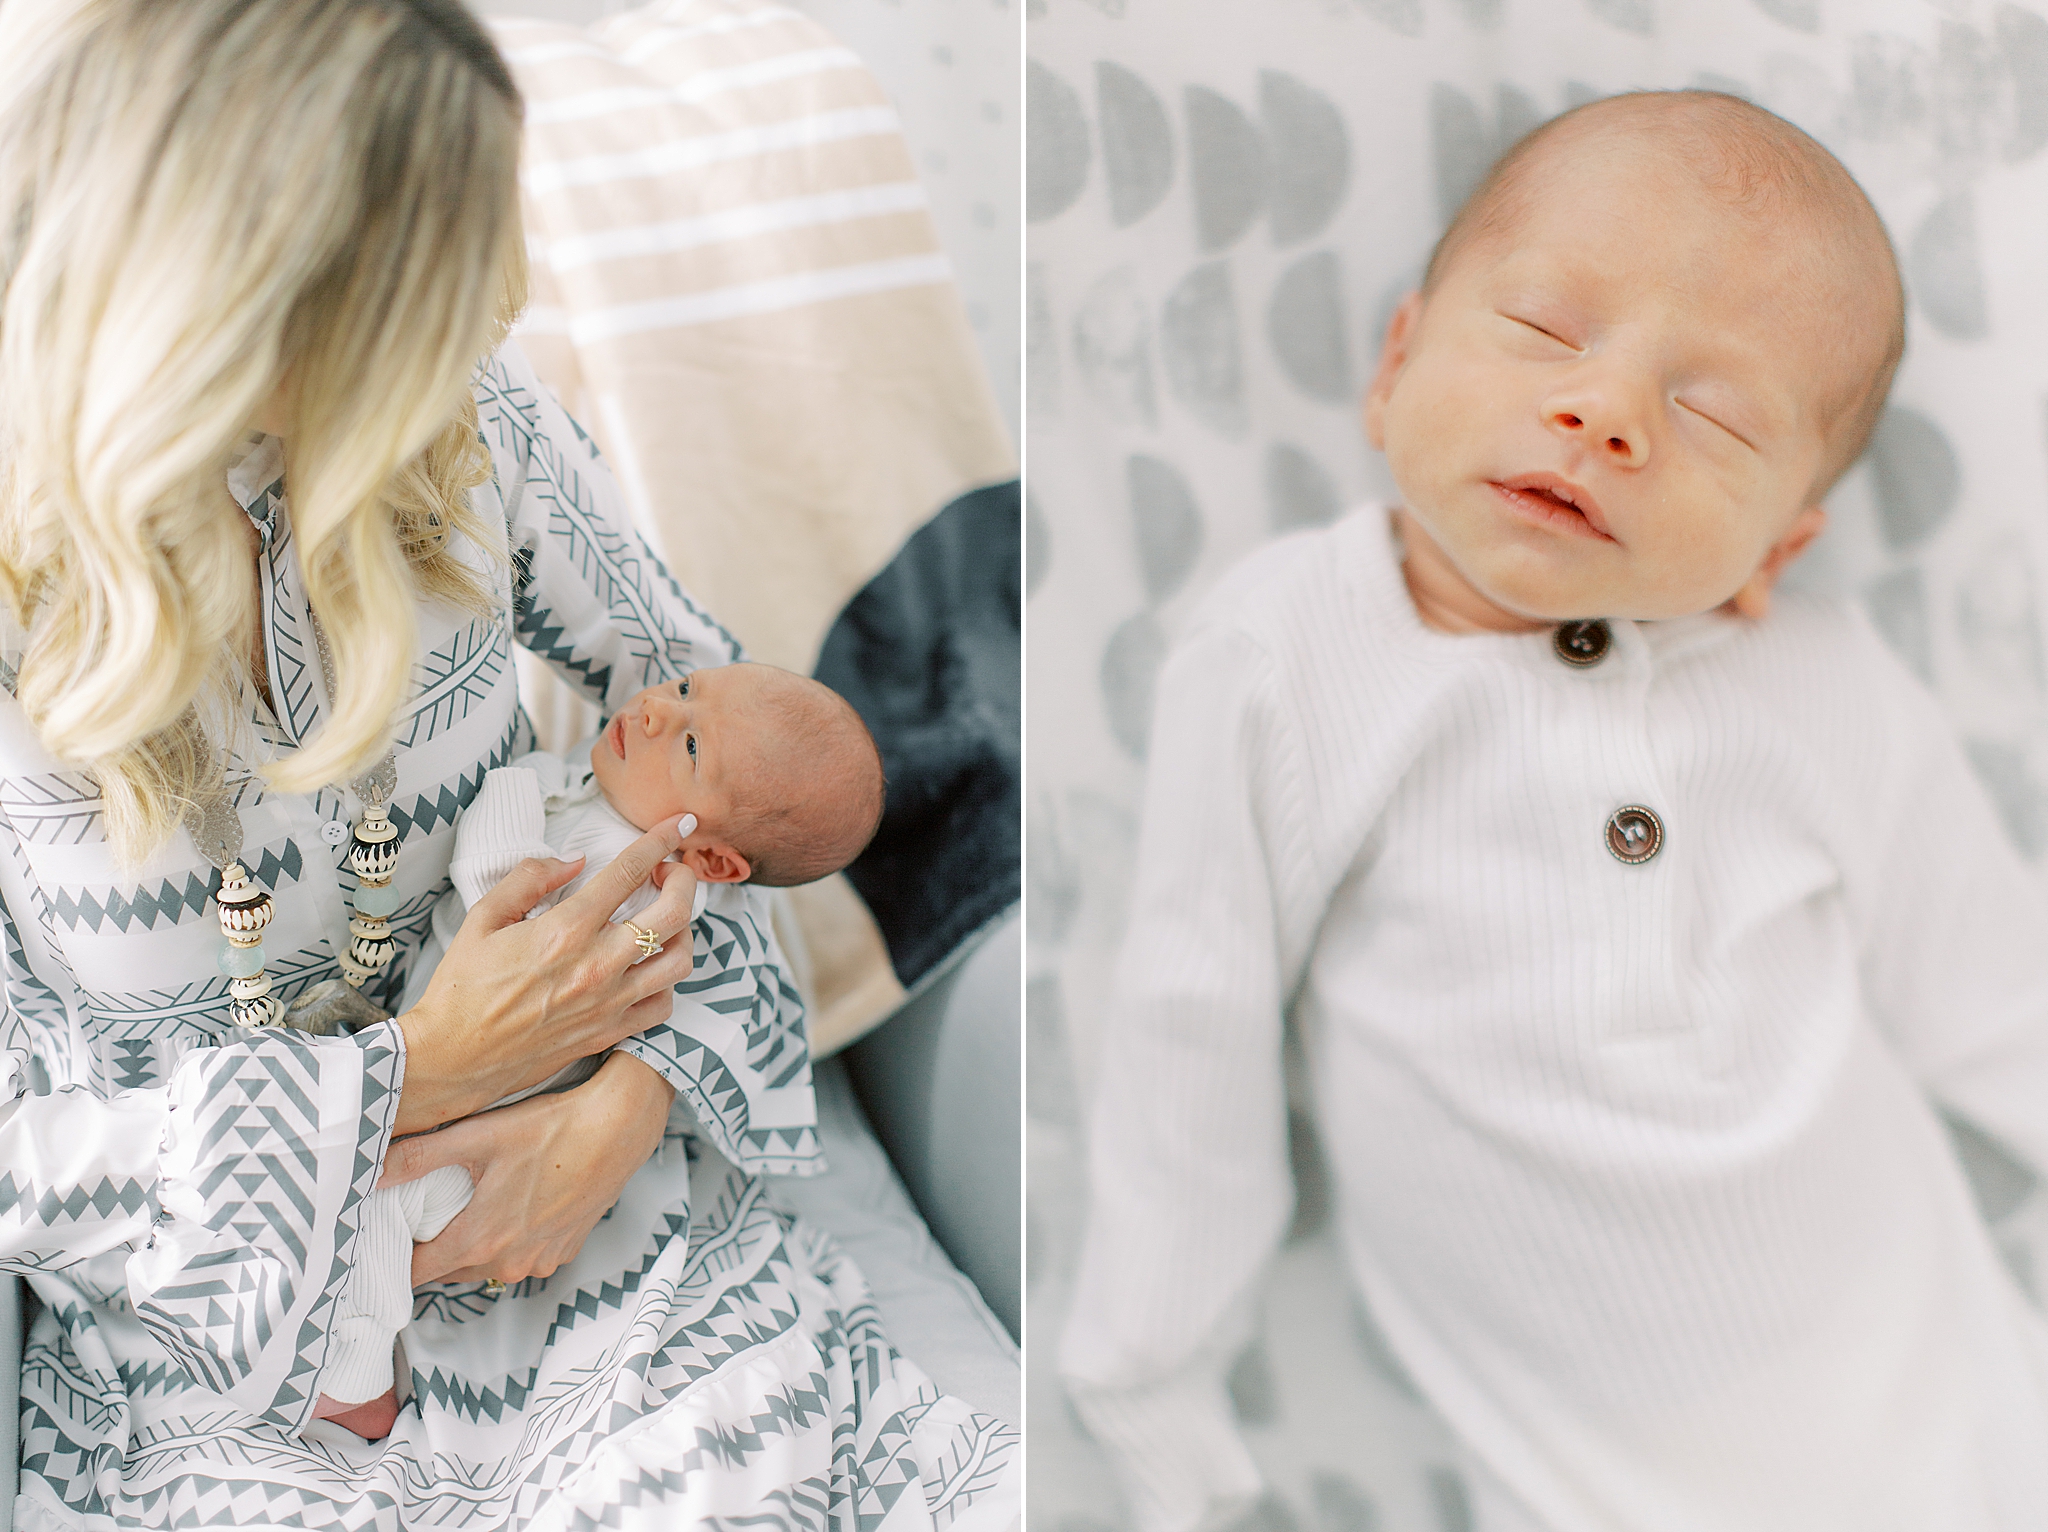 Charlotte Newborn Session at Home for baby boy in white outfit